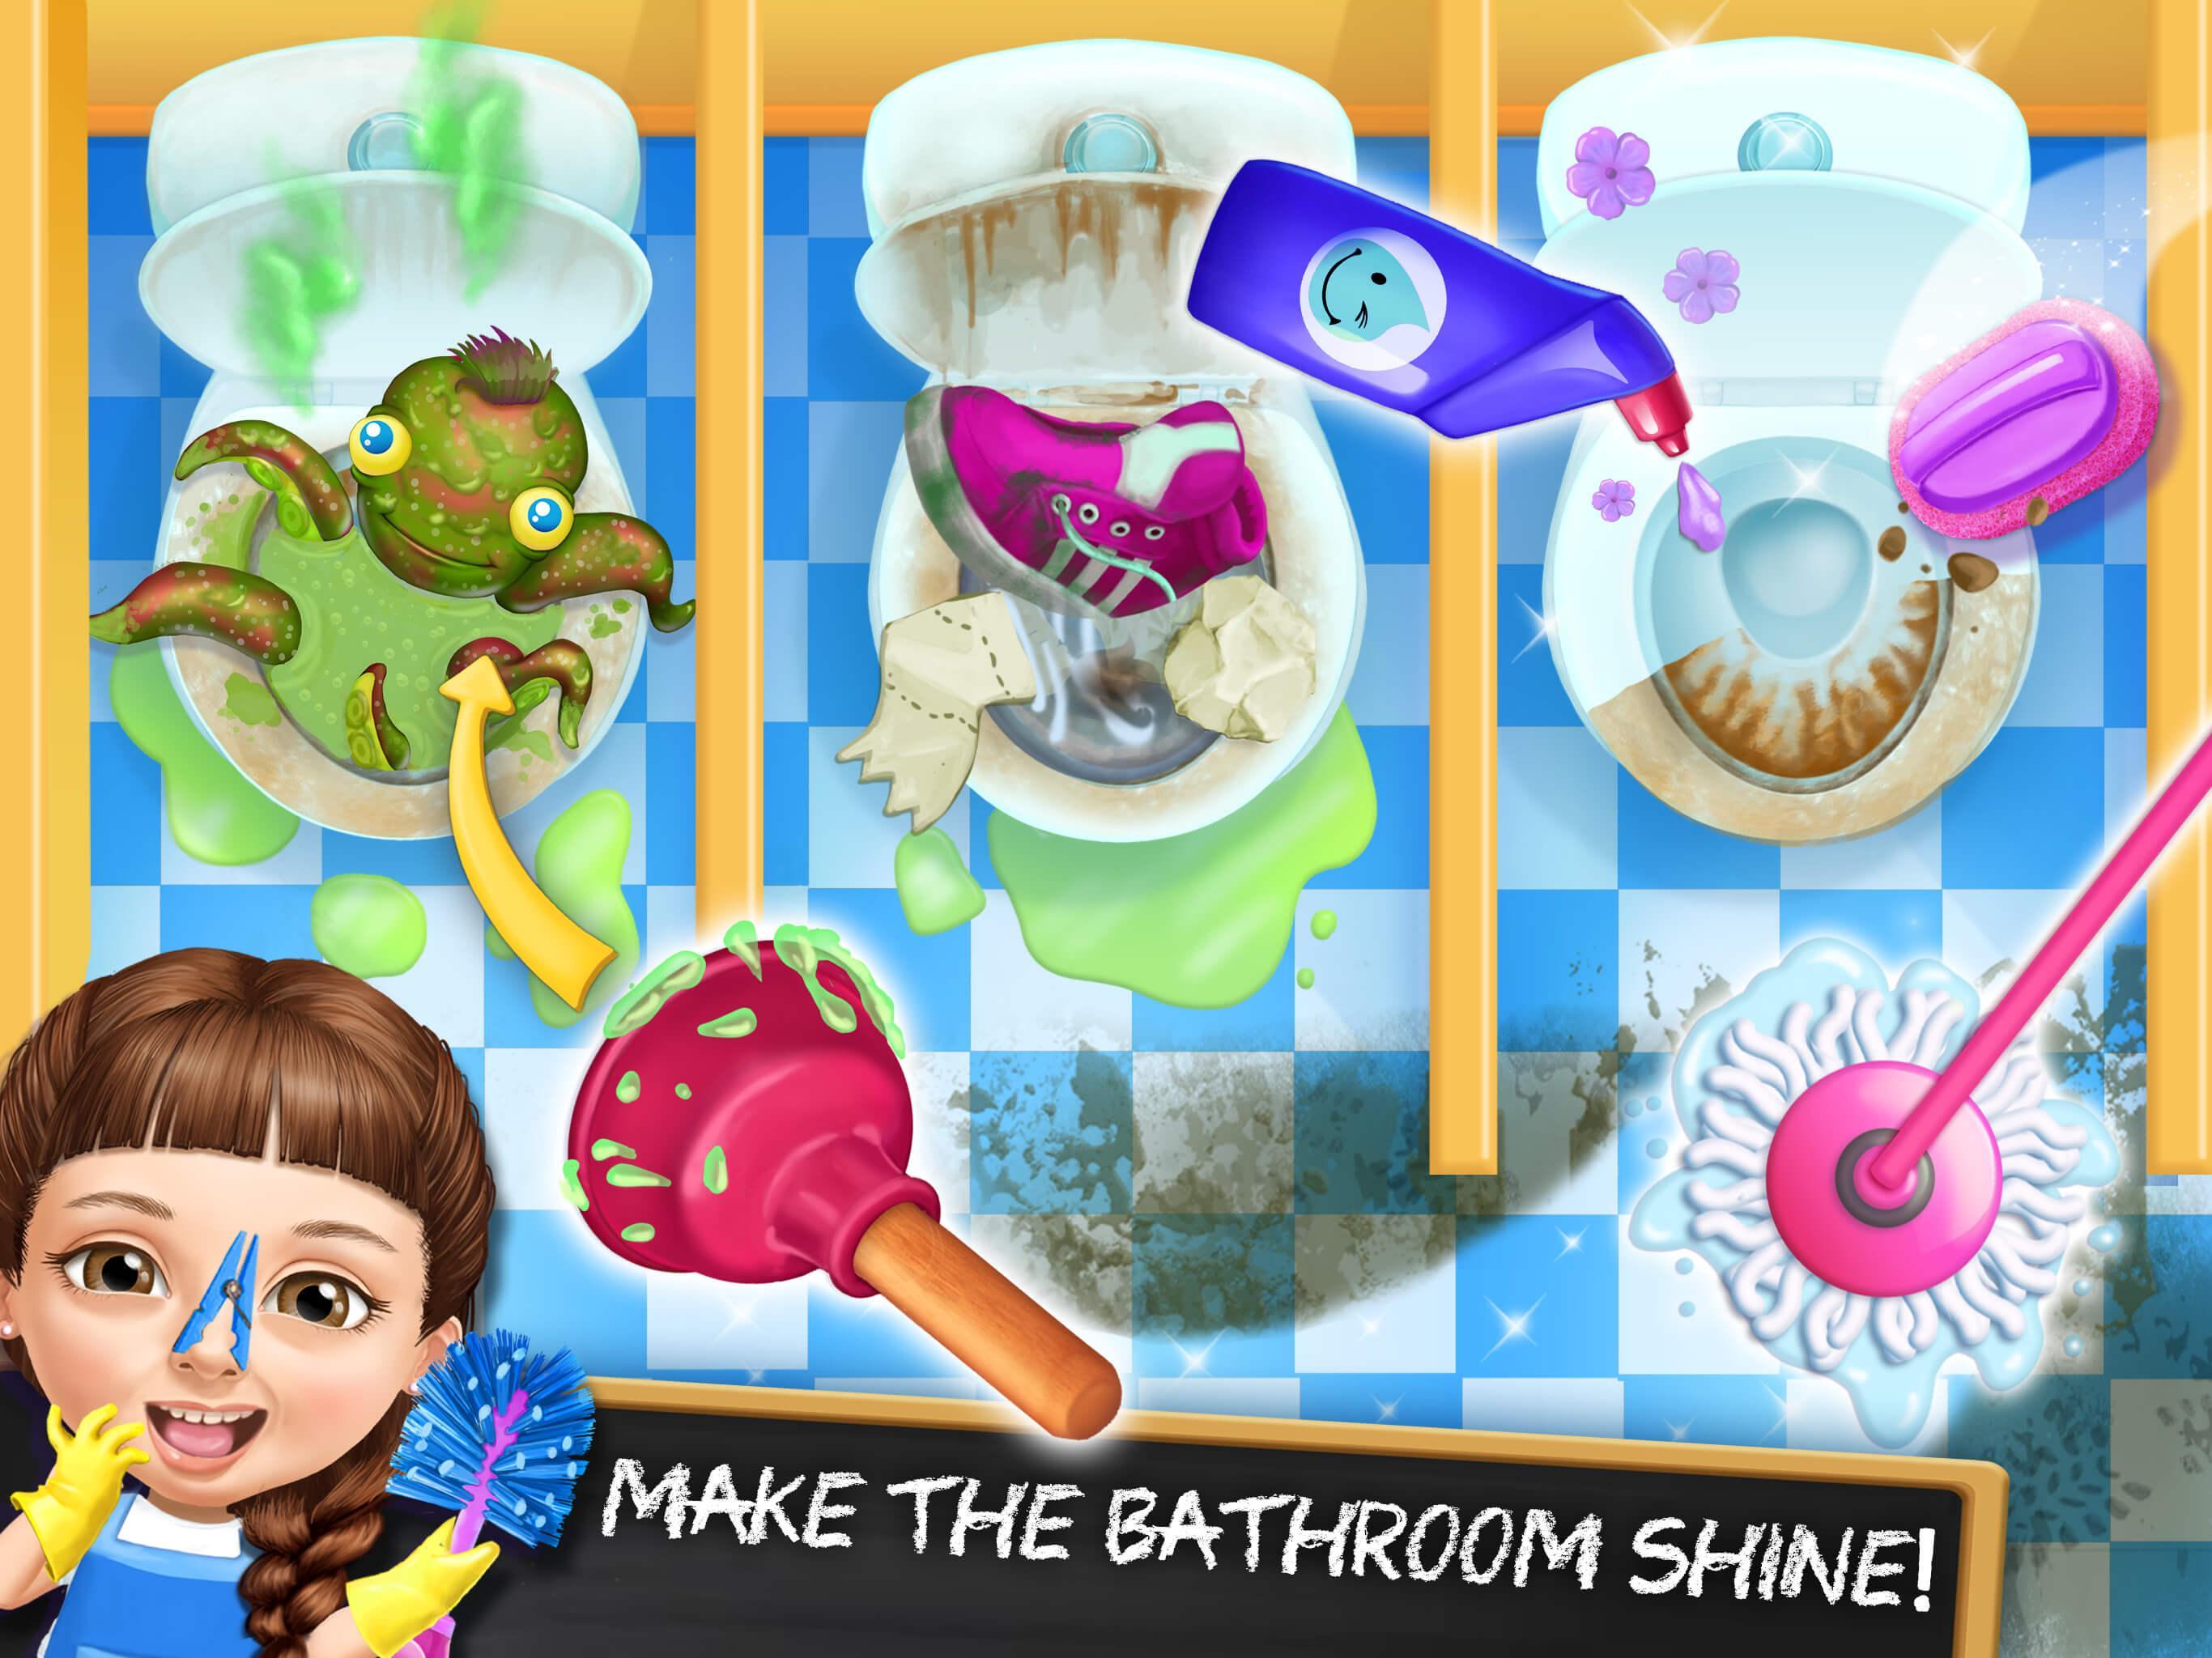 Sweet Baby Girl Cleanup 6 School Cleaning Game Android Download Taptap,Curtains For Small Windows